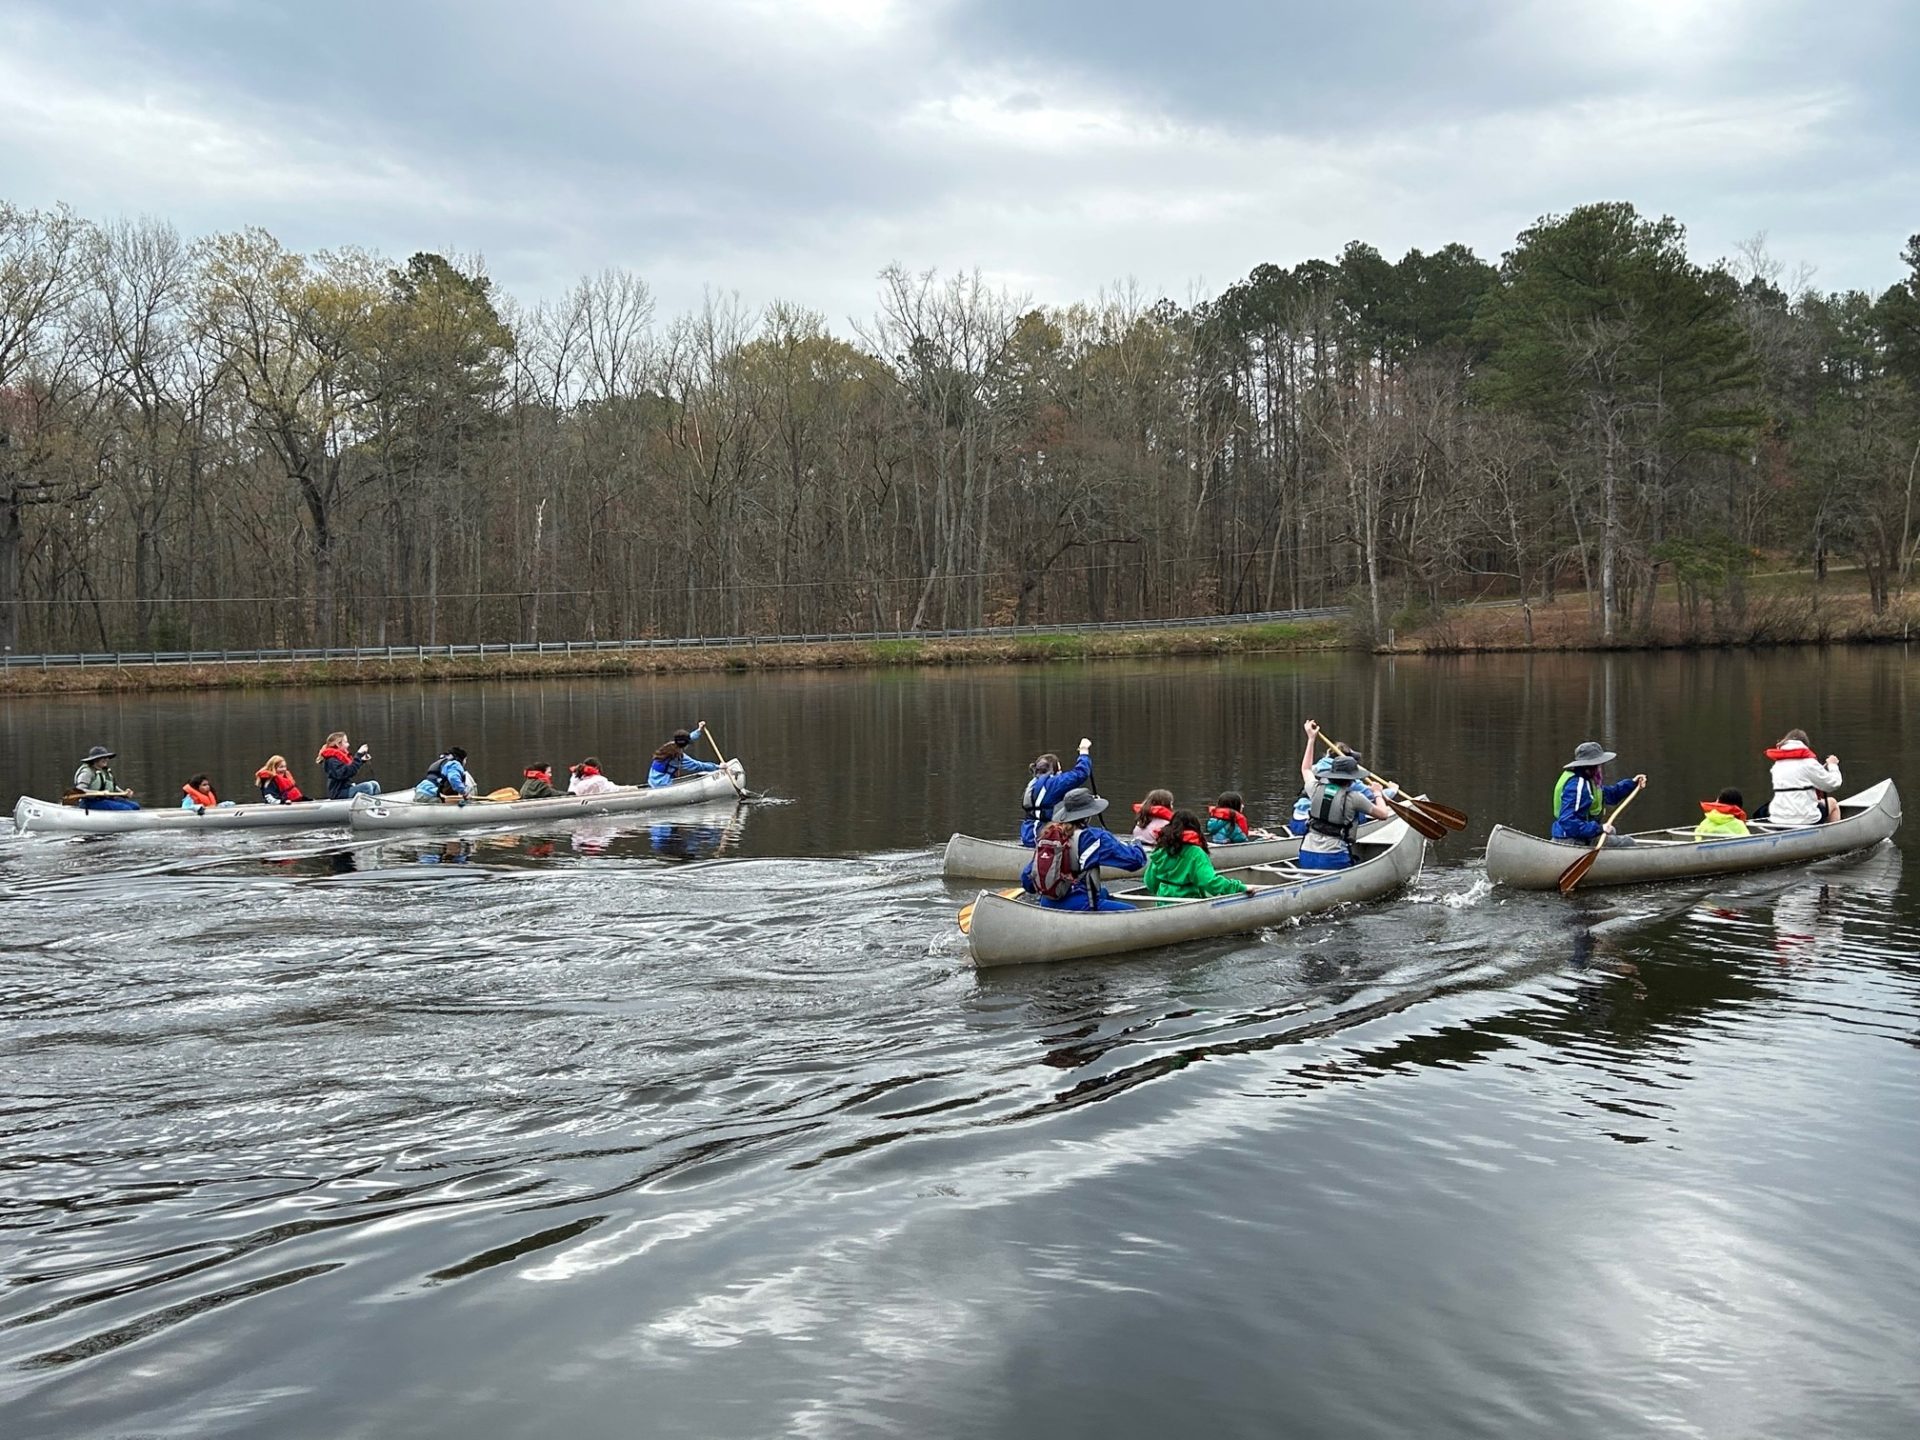  Girl Scouts join the Blazing Blue Herons for a race across Burke’s Mill Pond 